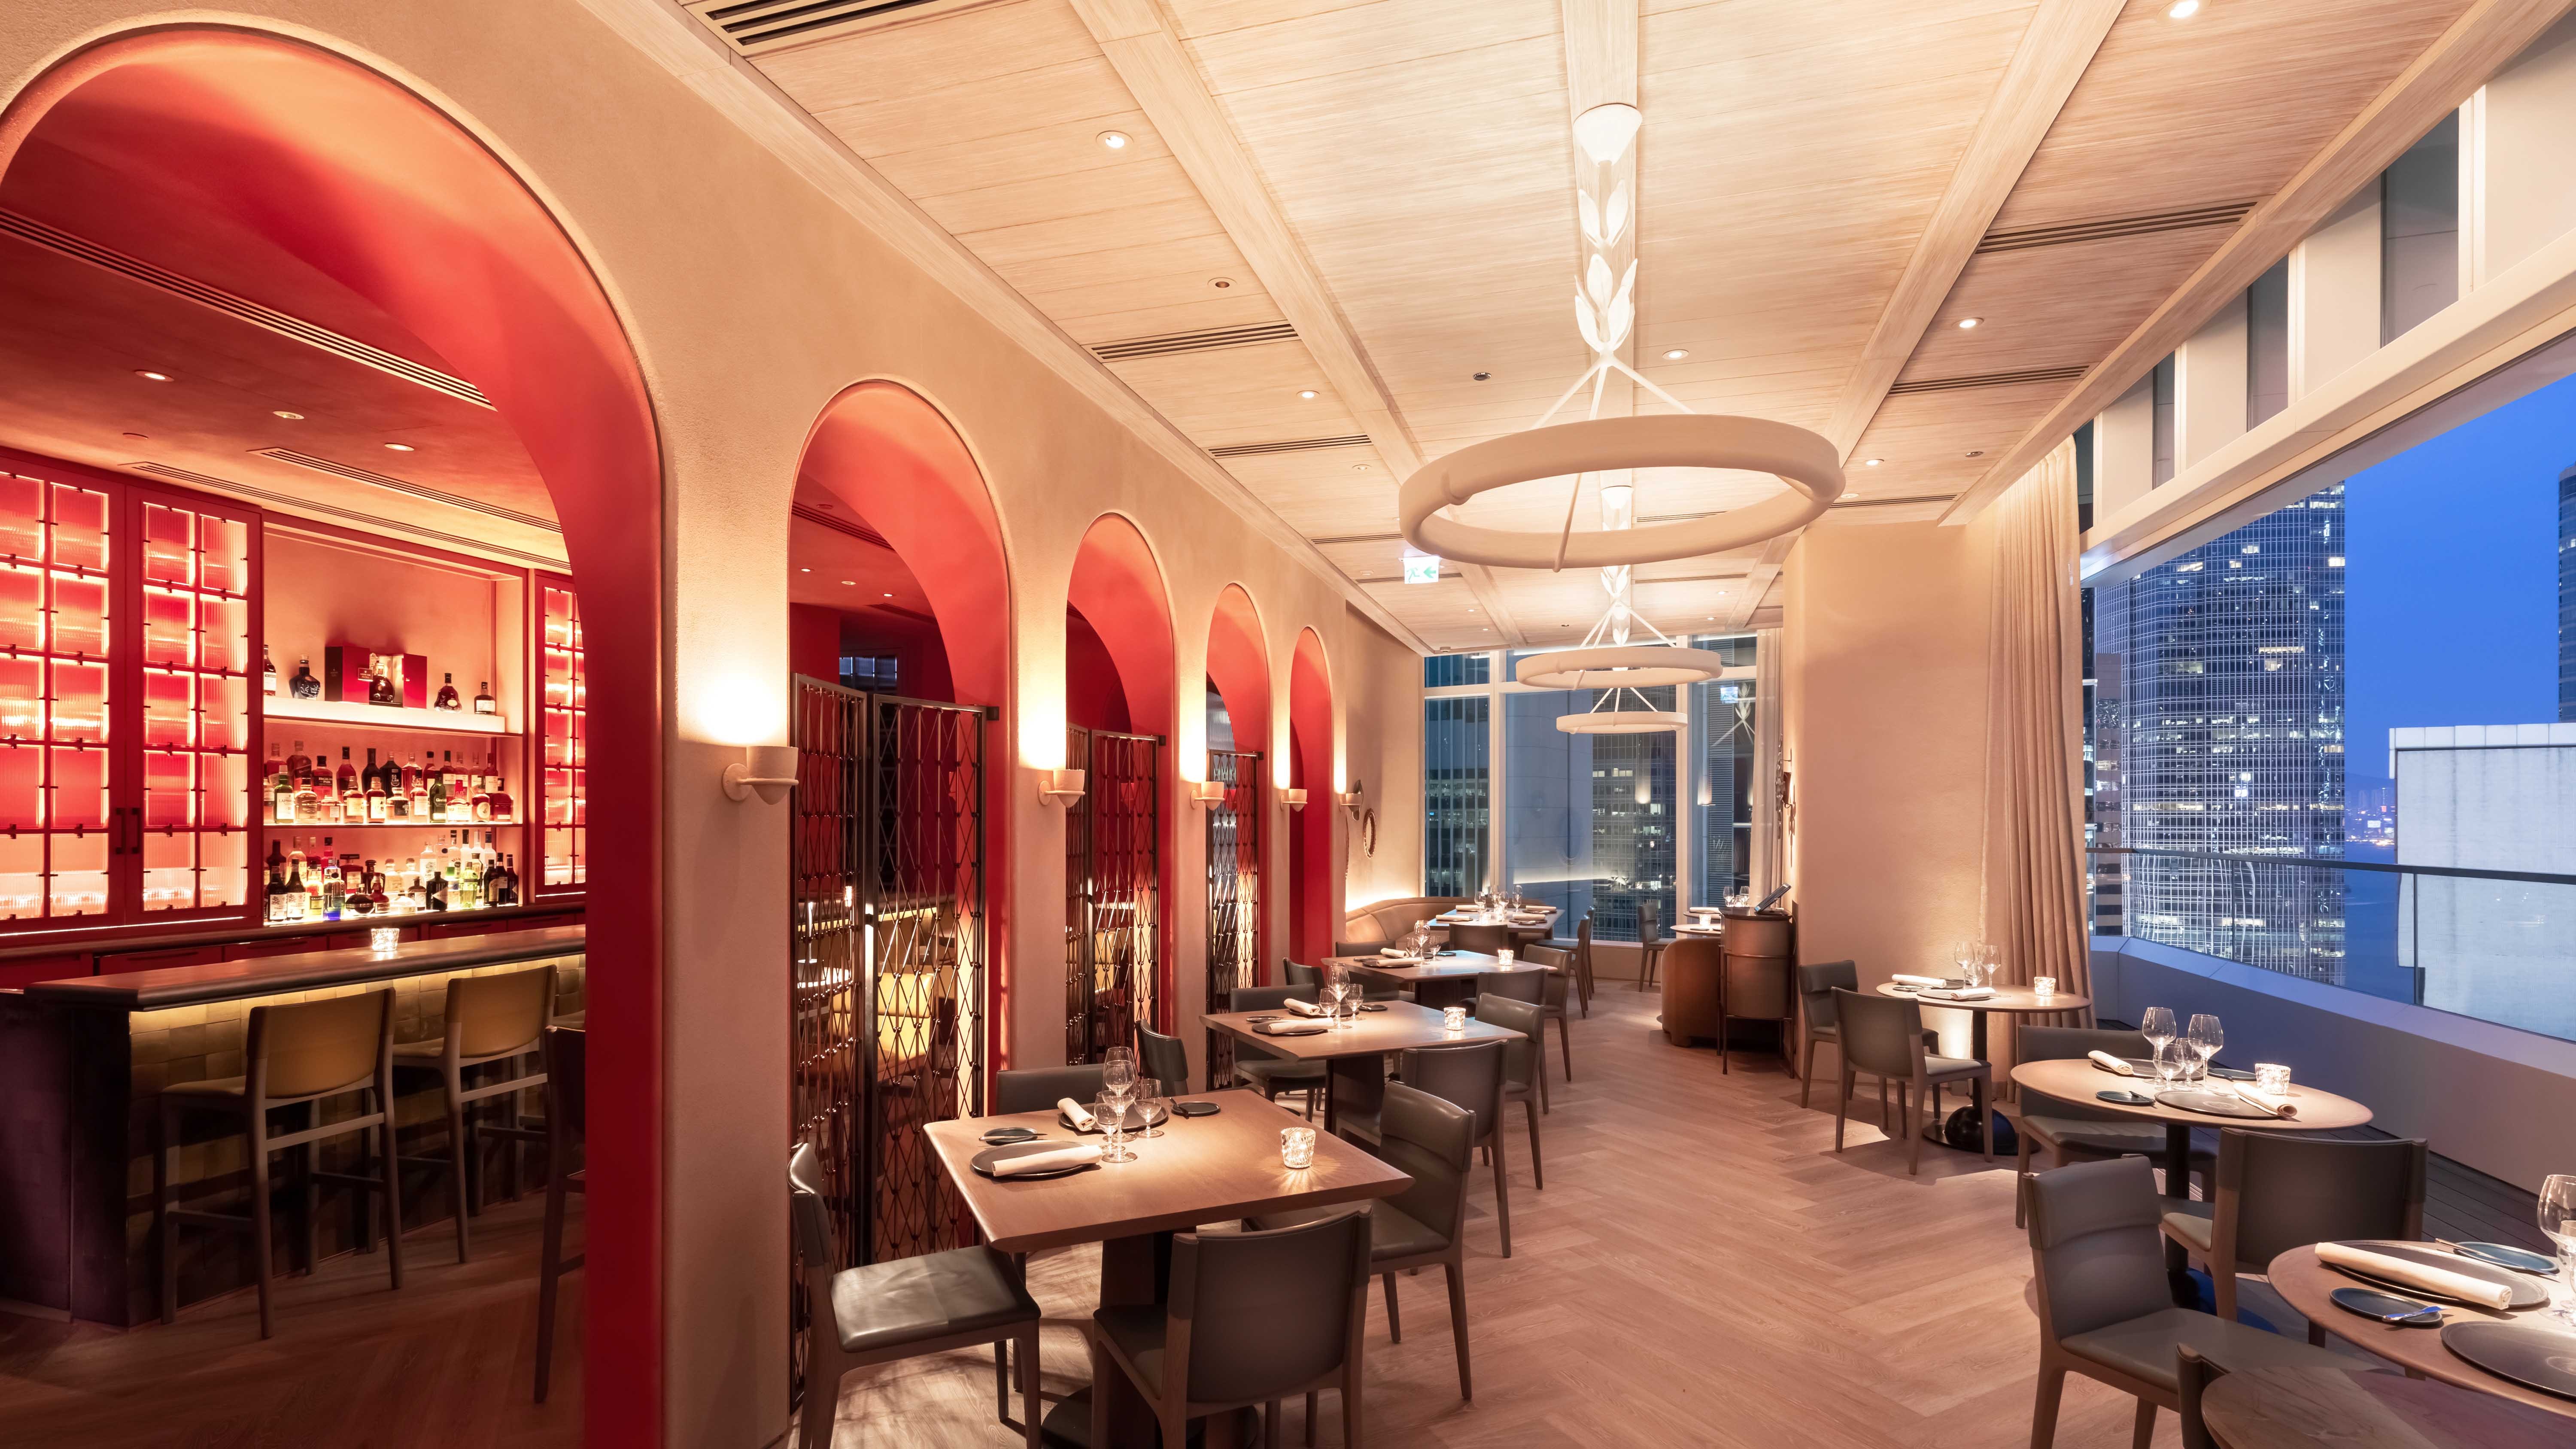 Arbor offers a cosy dining room with sweeping city views. Photos: handouts